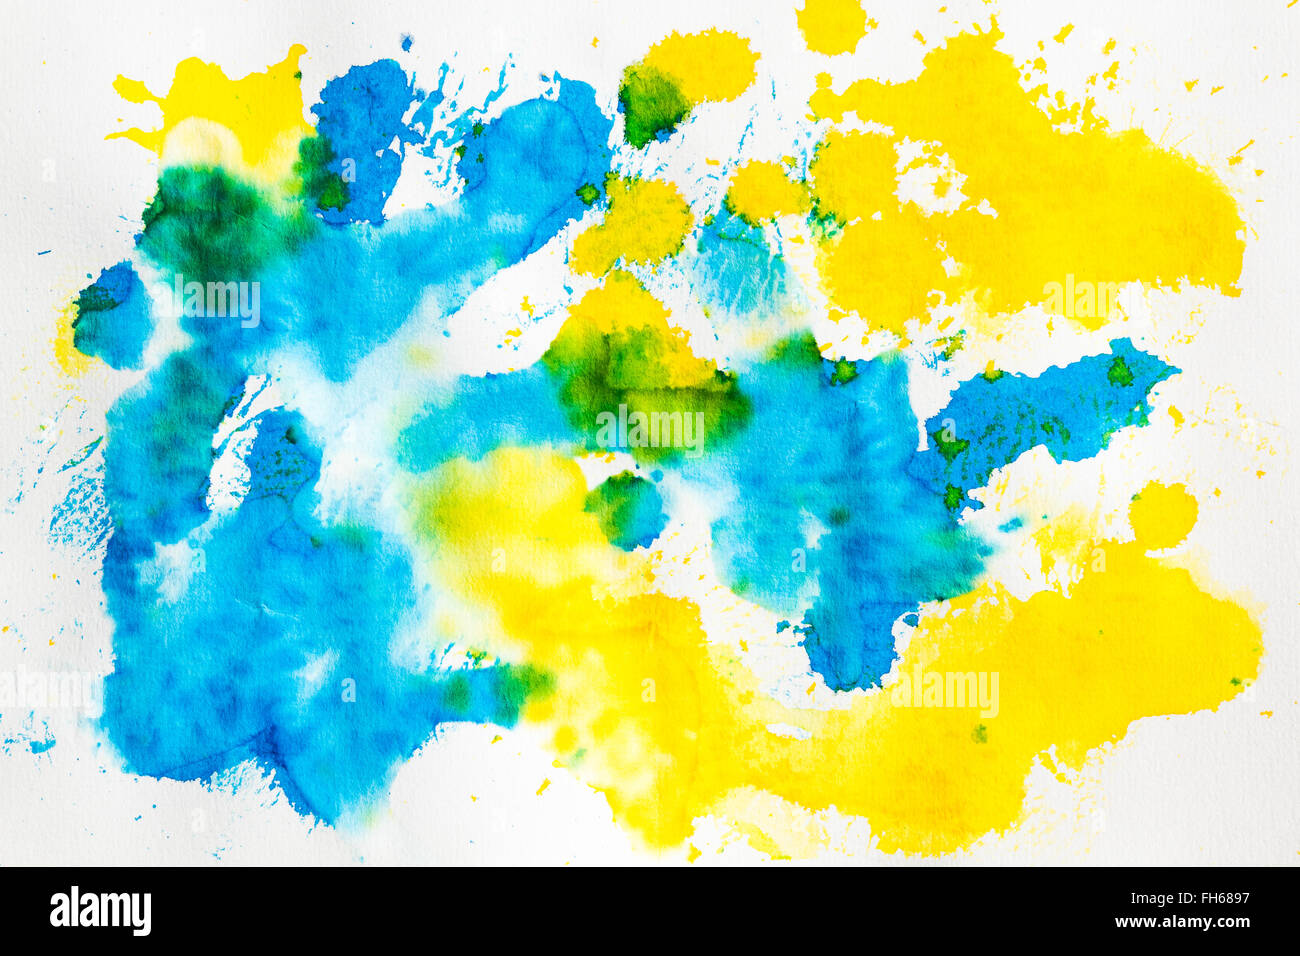 Watercolor blue yellow mix abstract background. Painted on white grainy paper. To use as as a texture or design element. Stock Photo